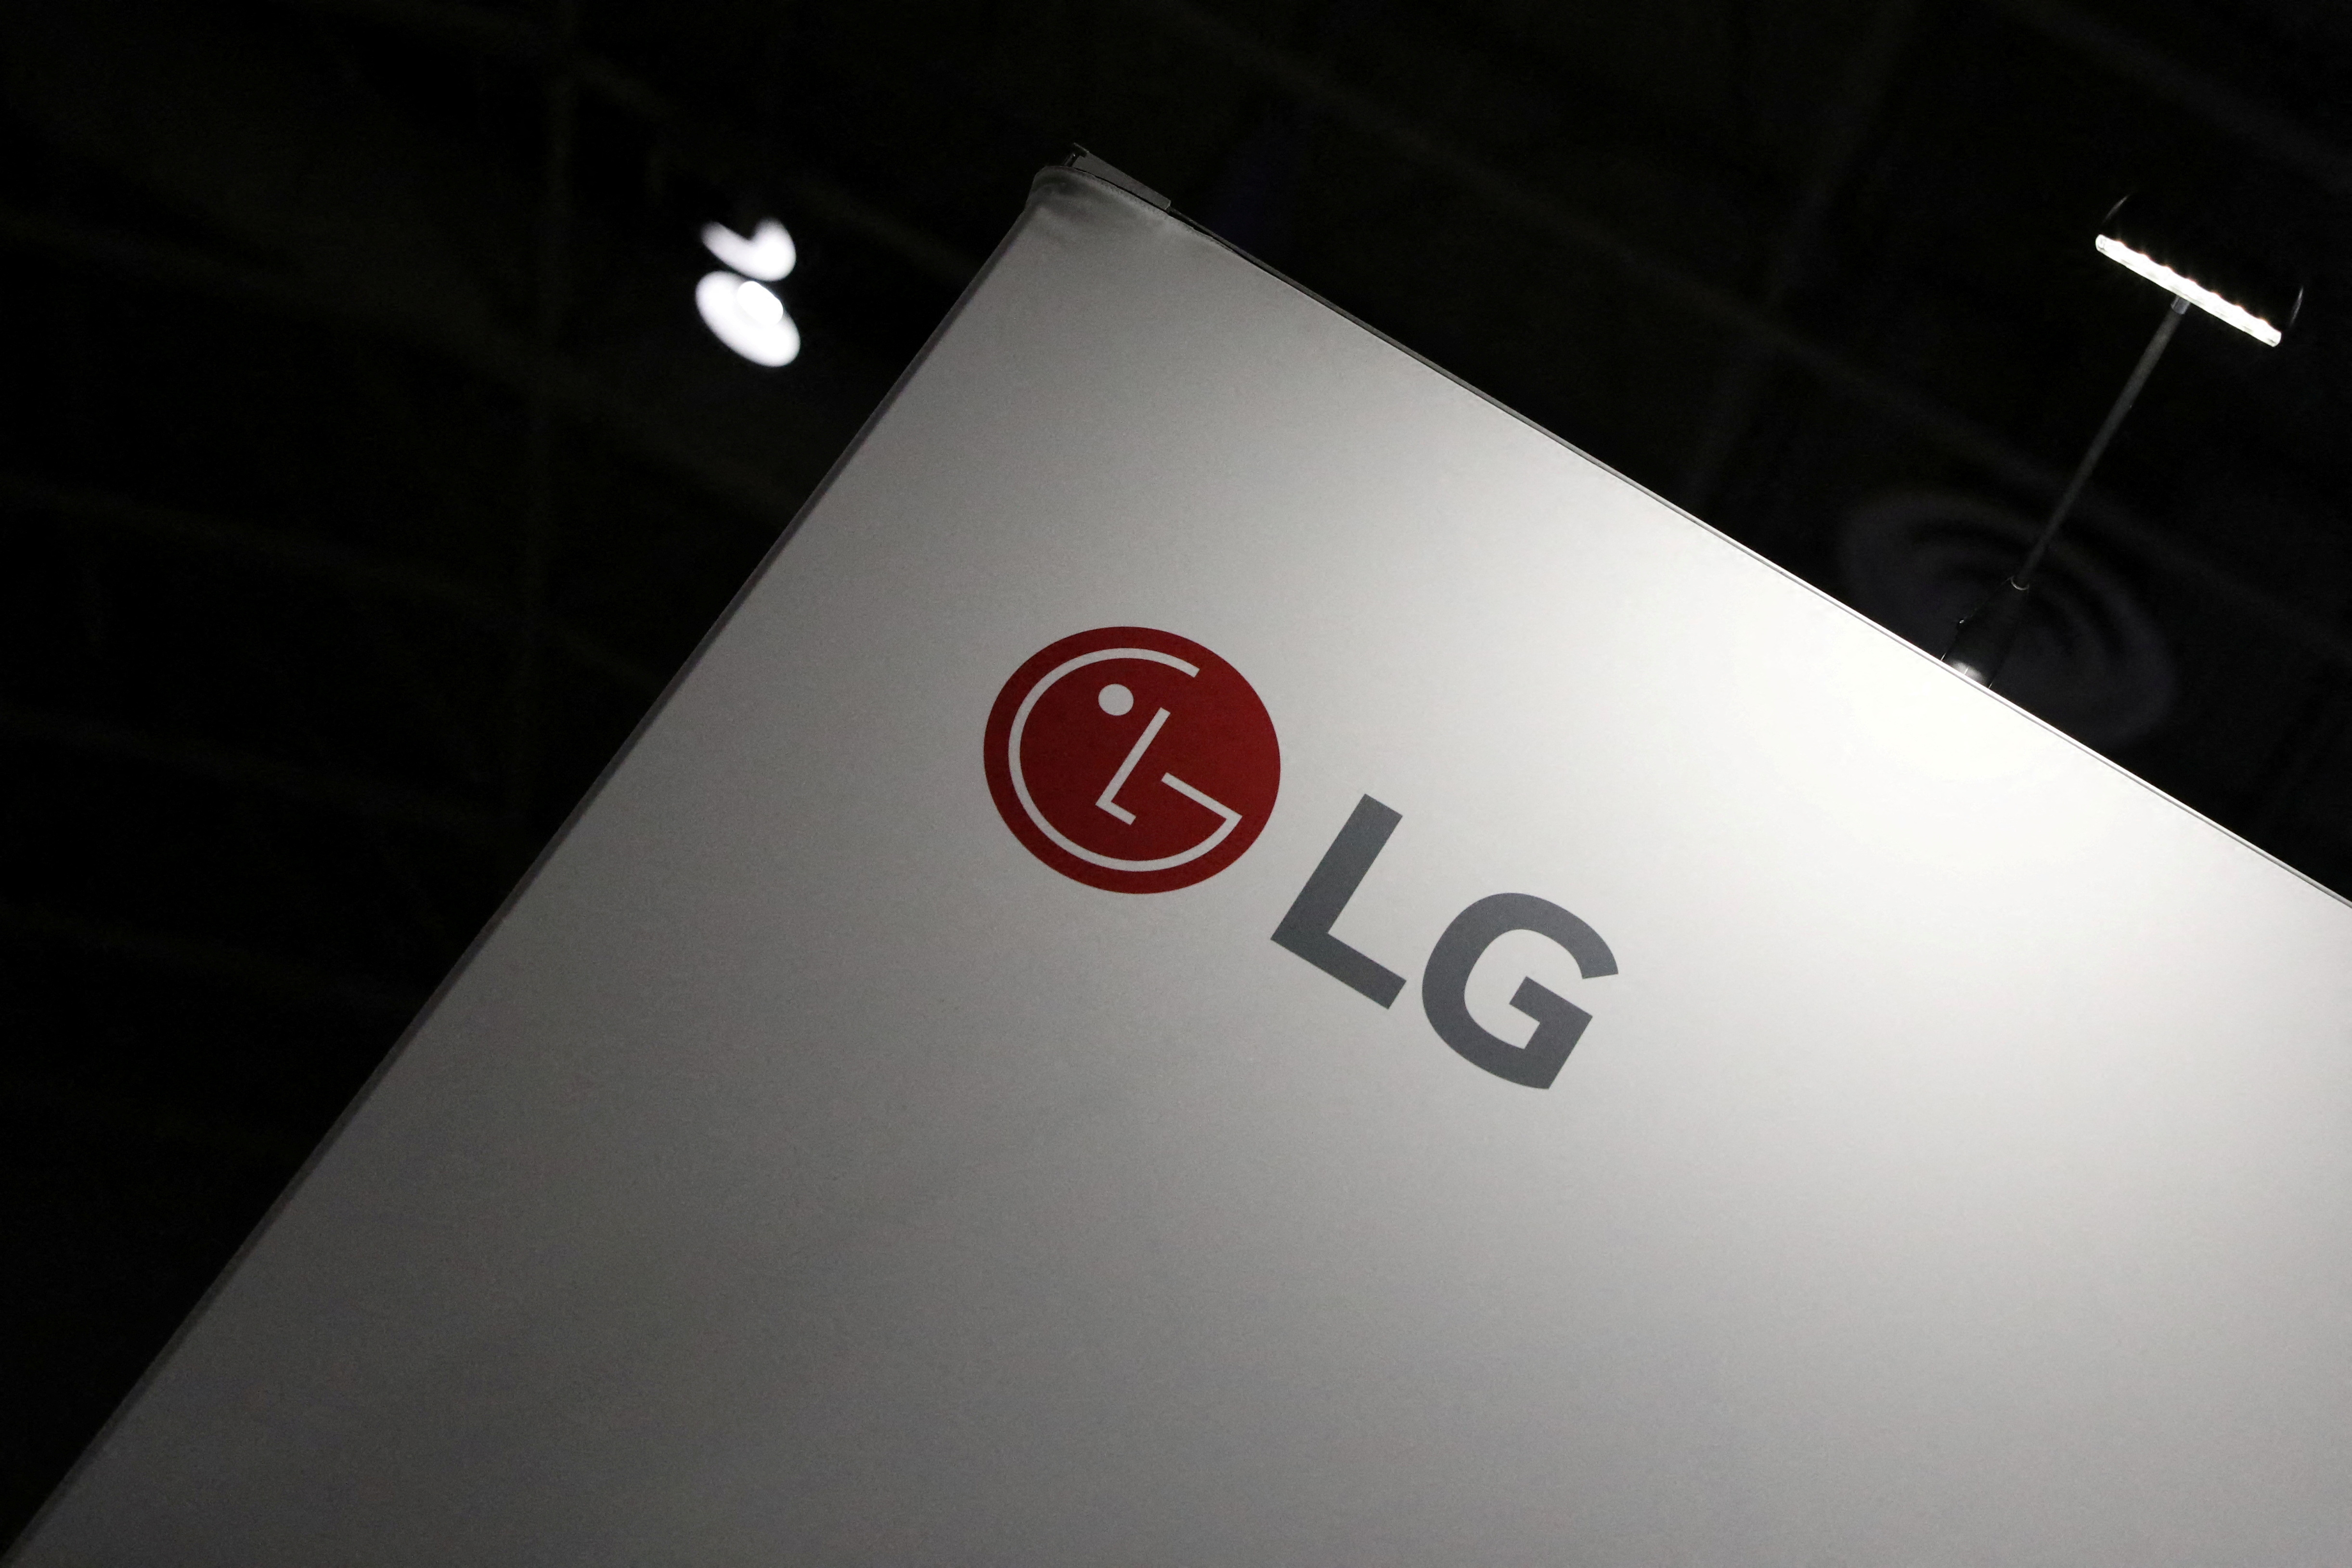 Display for South Korean multinational electronics company LG in Toronto